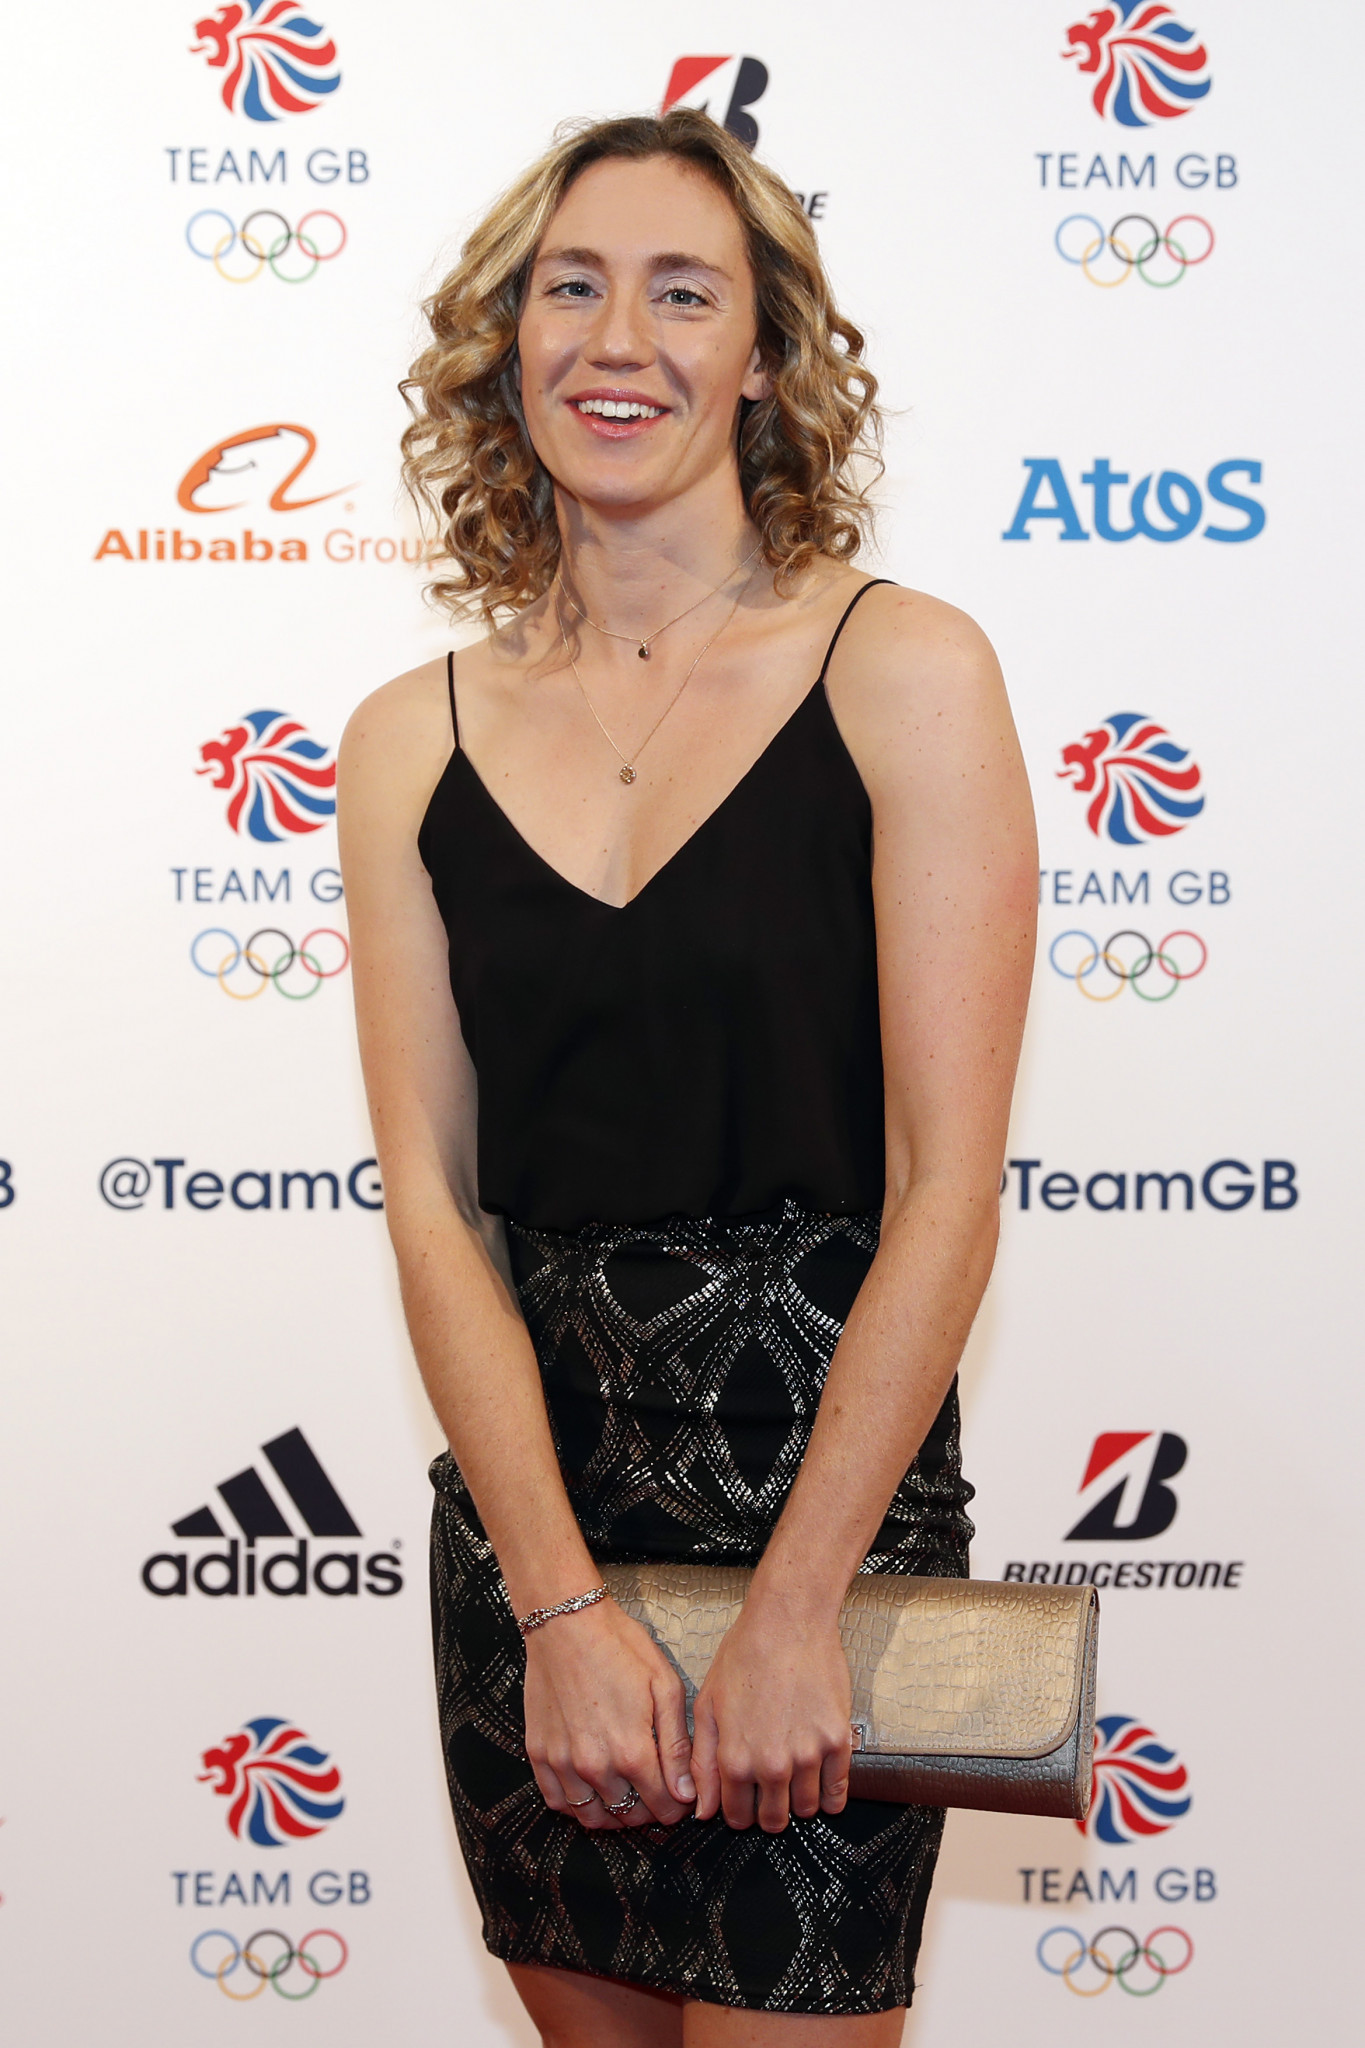 Lizzie Simmonds has been elected as the new chair of the BOA Athletes' Commission ©Getty Images